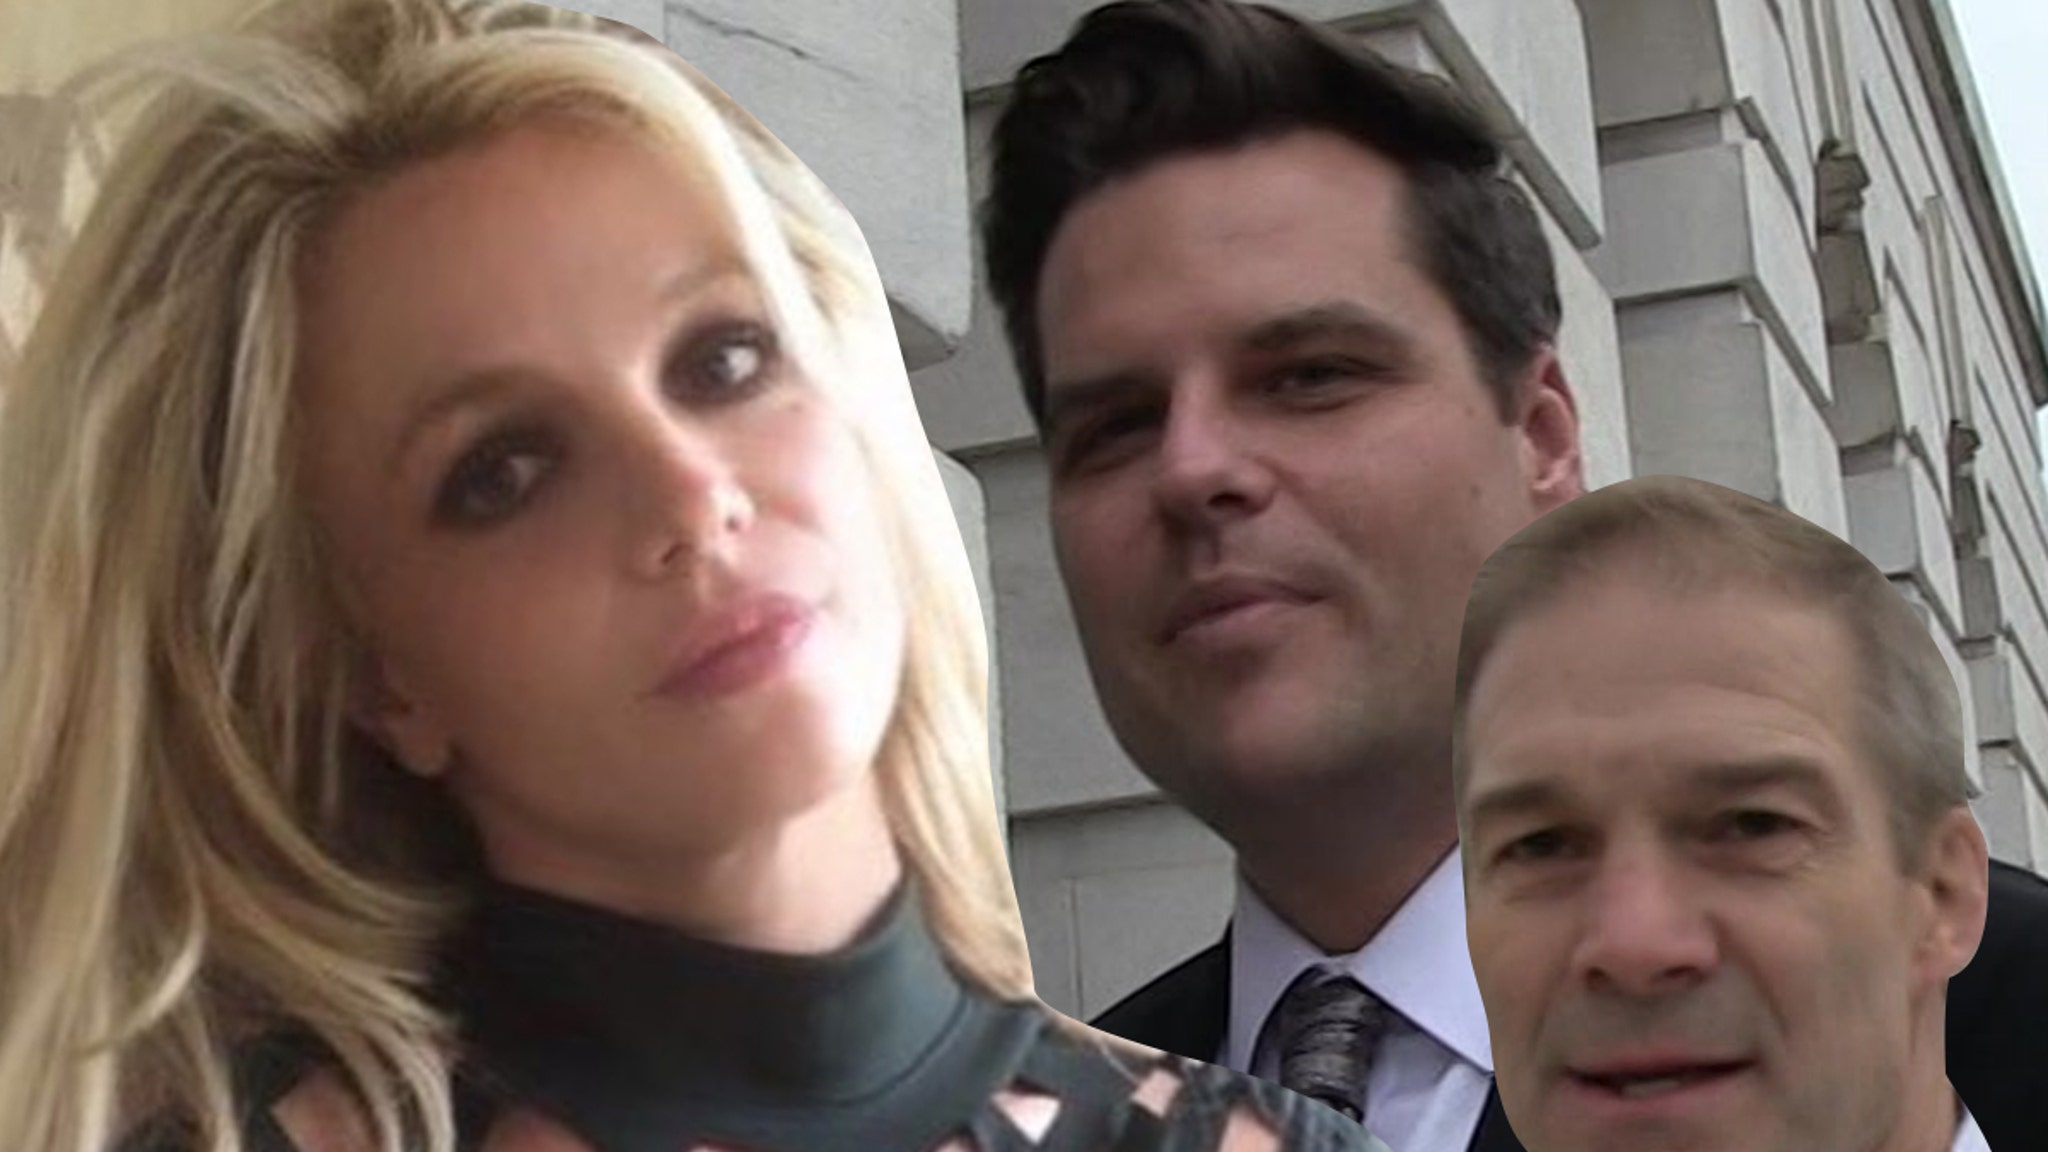 Britney Spears called for congressional hearing